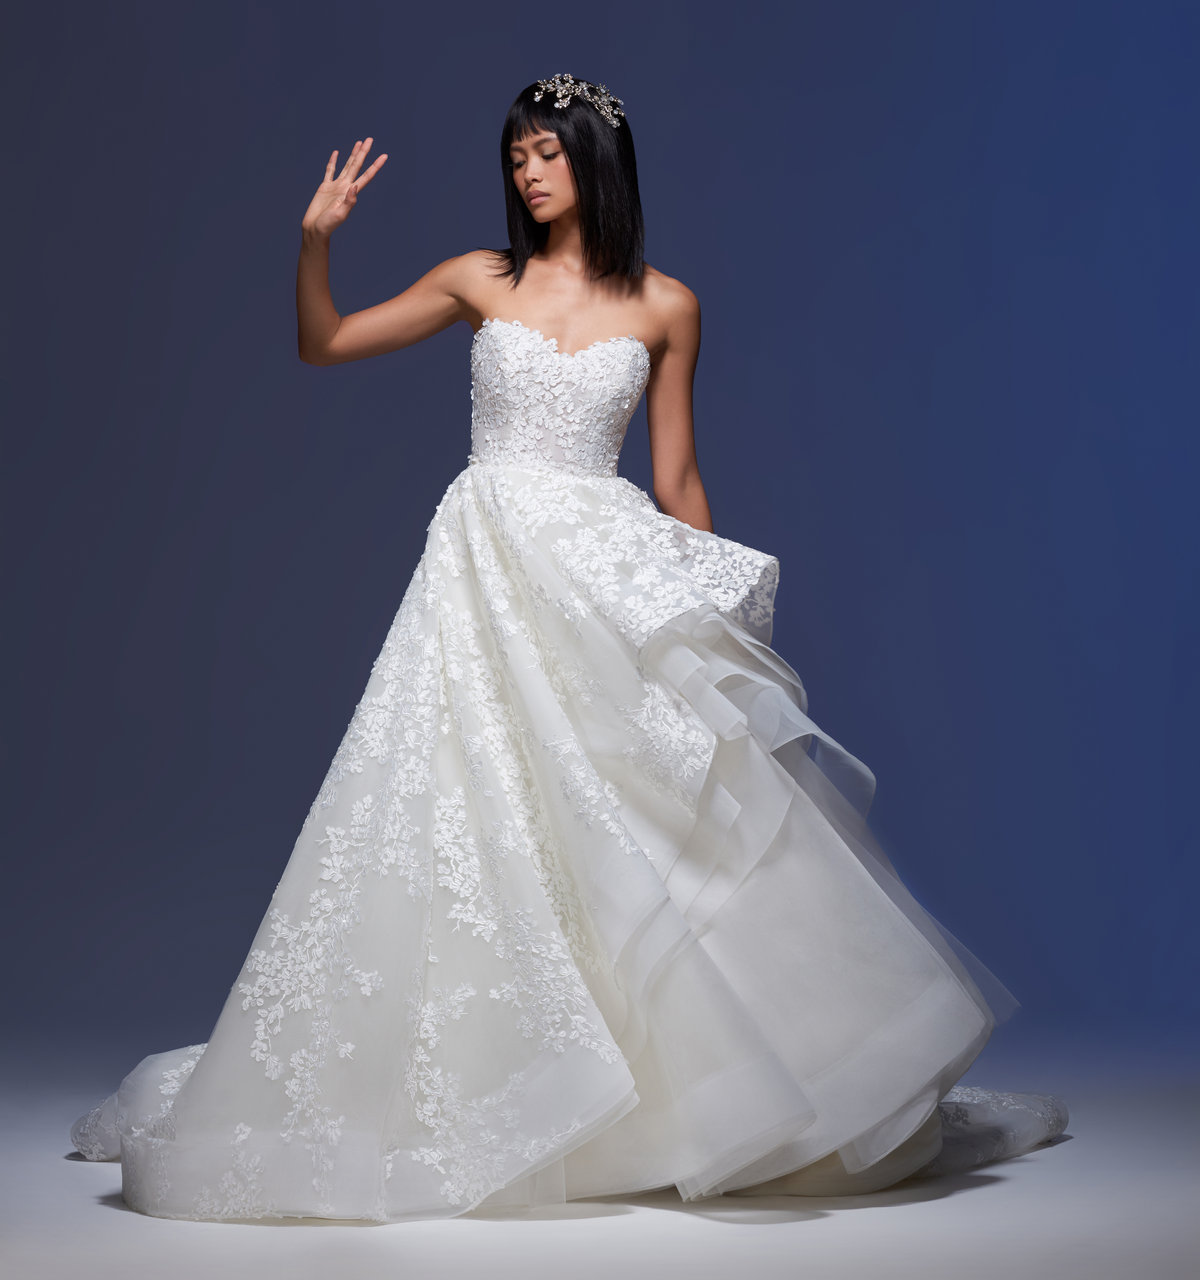 Strapless Sweetheart Neckline Embroidered Tulle Ball Gown Wedding